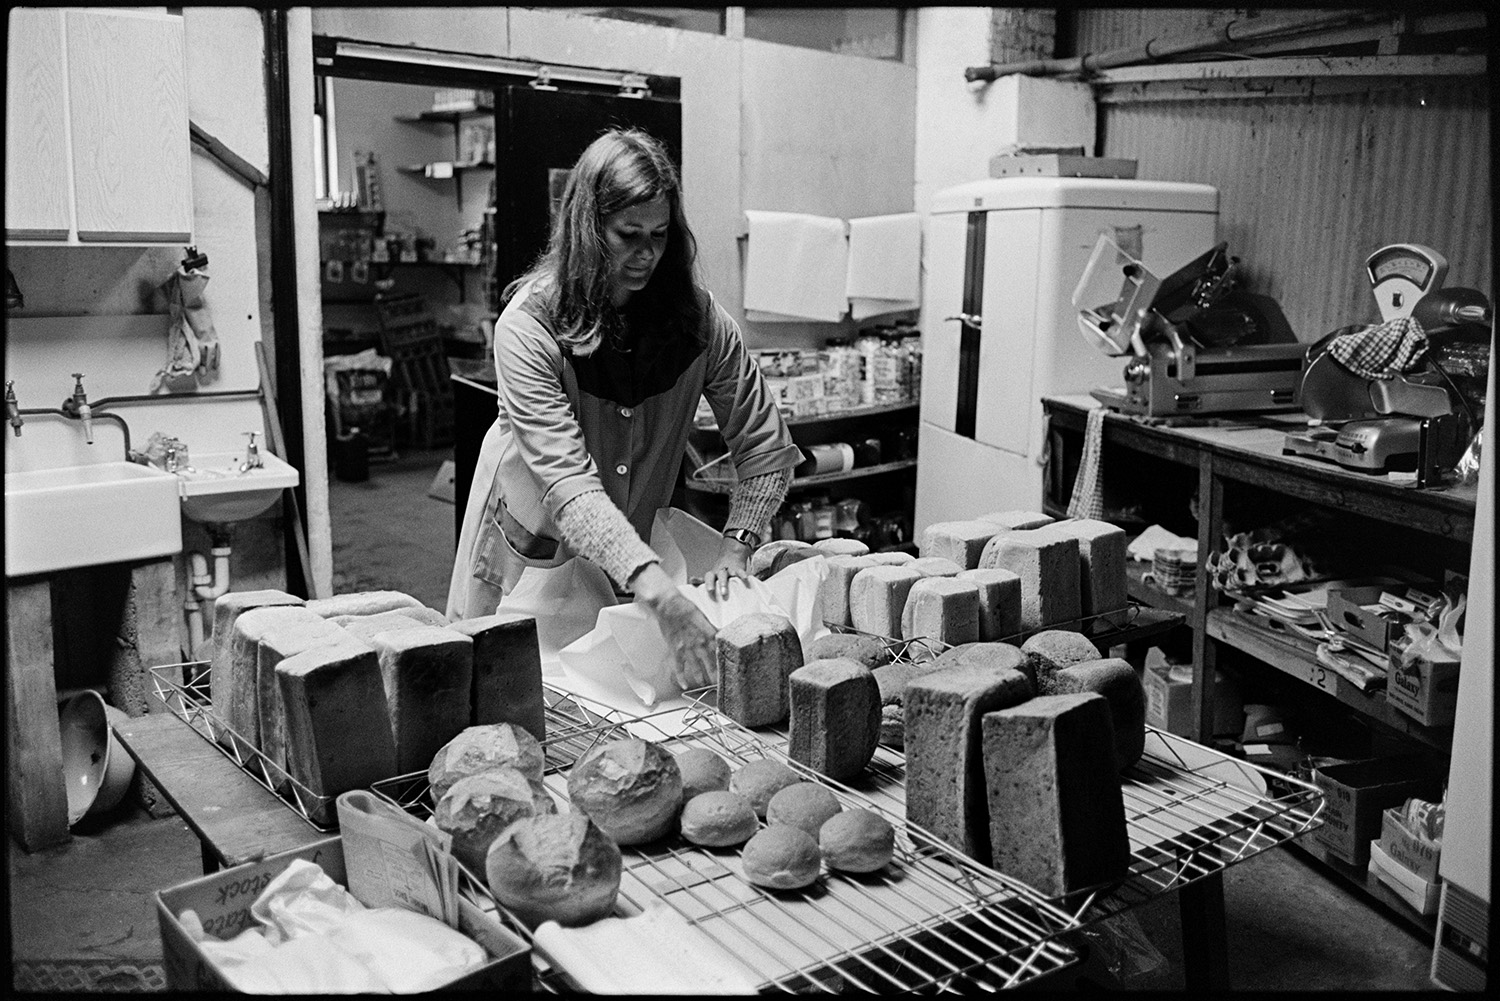 Women shop assistants wrapping bread in village shop store.
[Margaret Stoneman wrapping bread in the Church Street Stores, Dolton. Loaves and rolls are on the table in front of her and in the background a sink and scales are visible.]